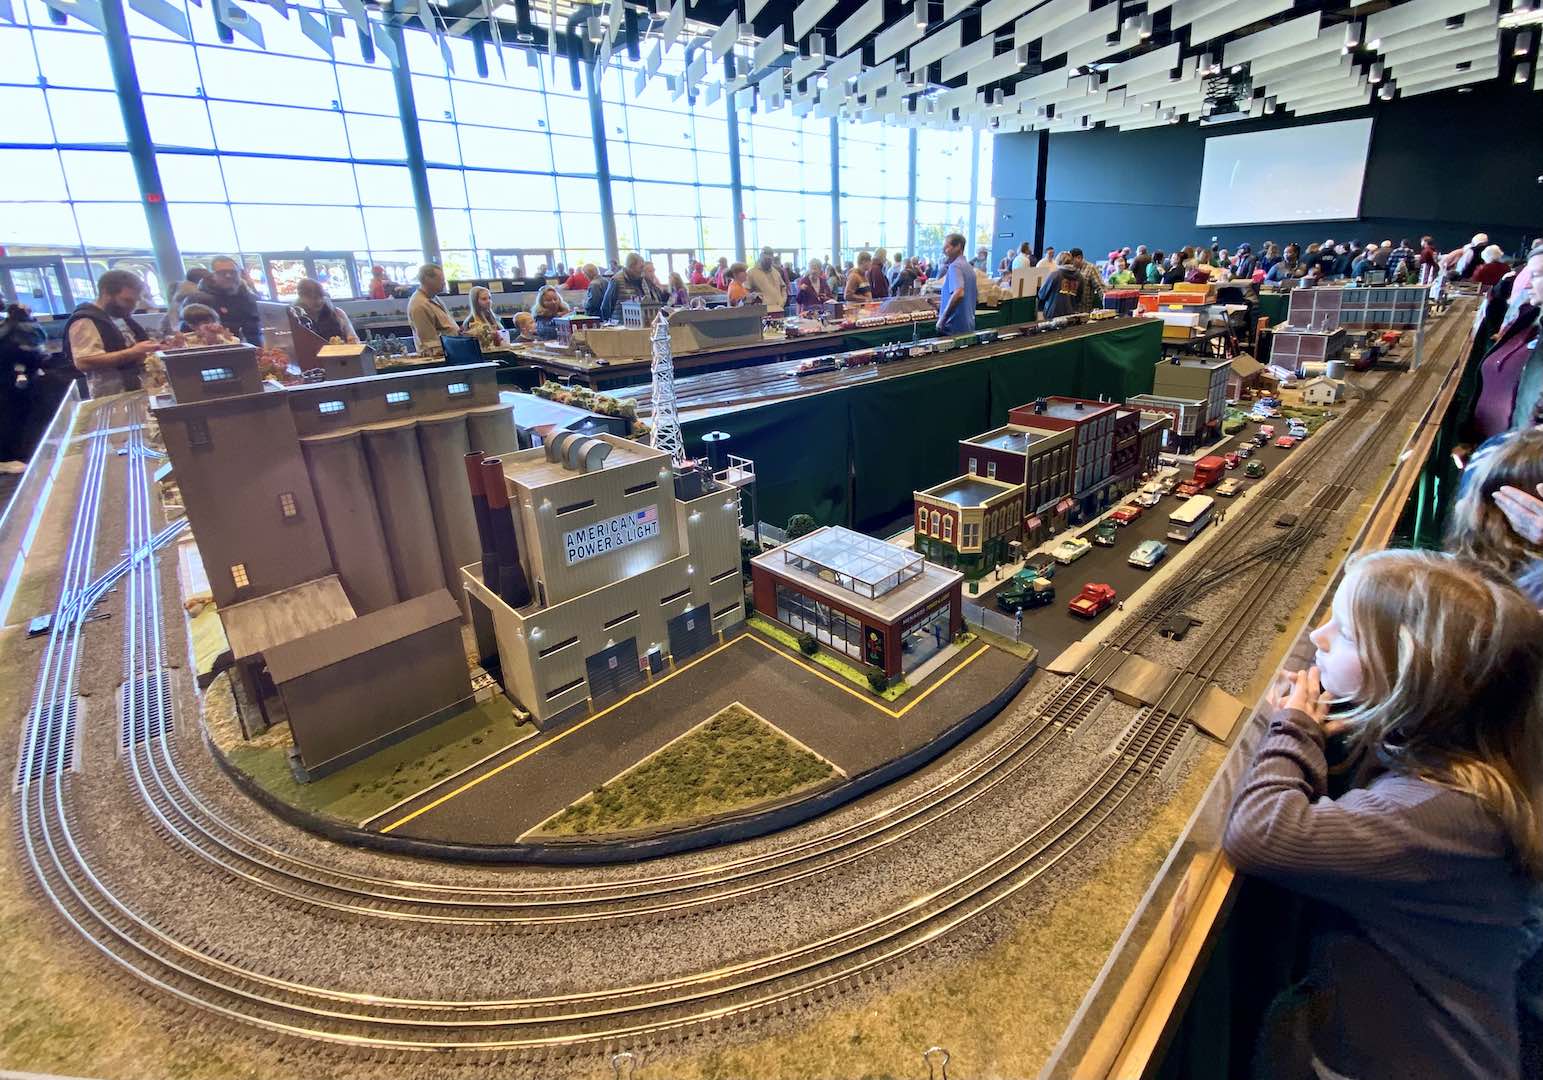 Easily one of Chris's favorite annual events—seeing all the miniature worlds of railroading imagination!